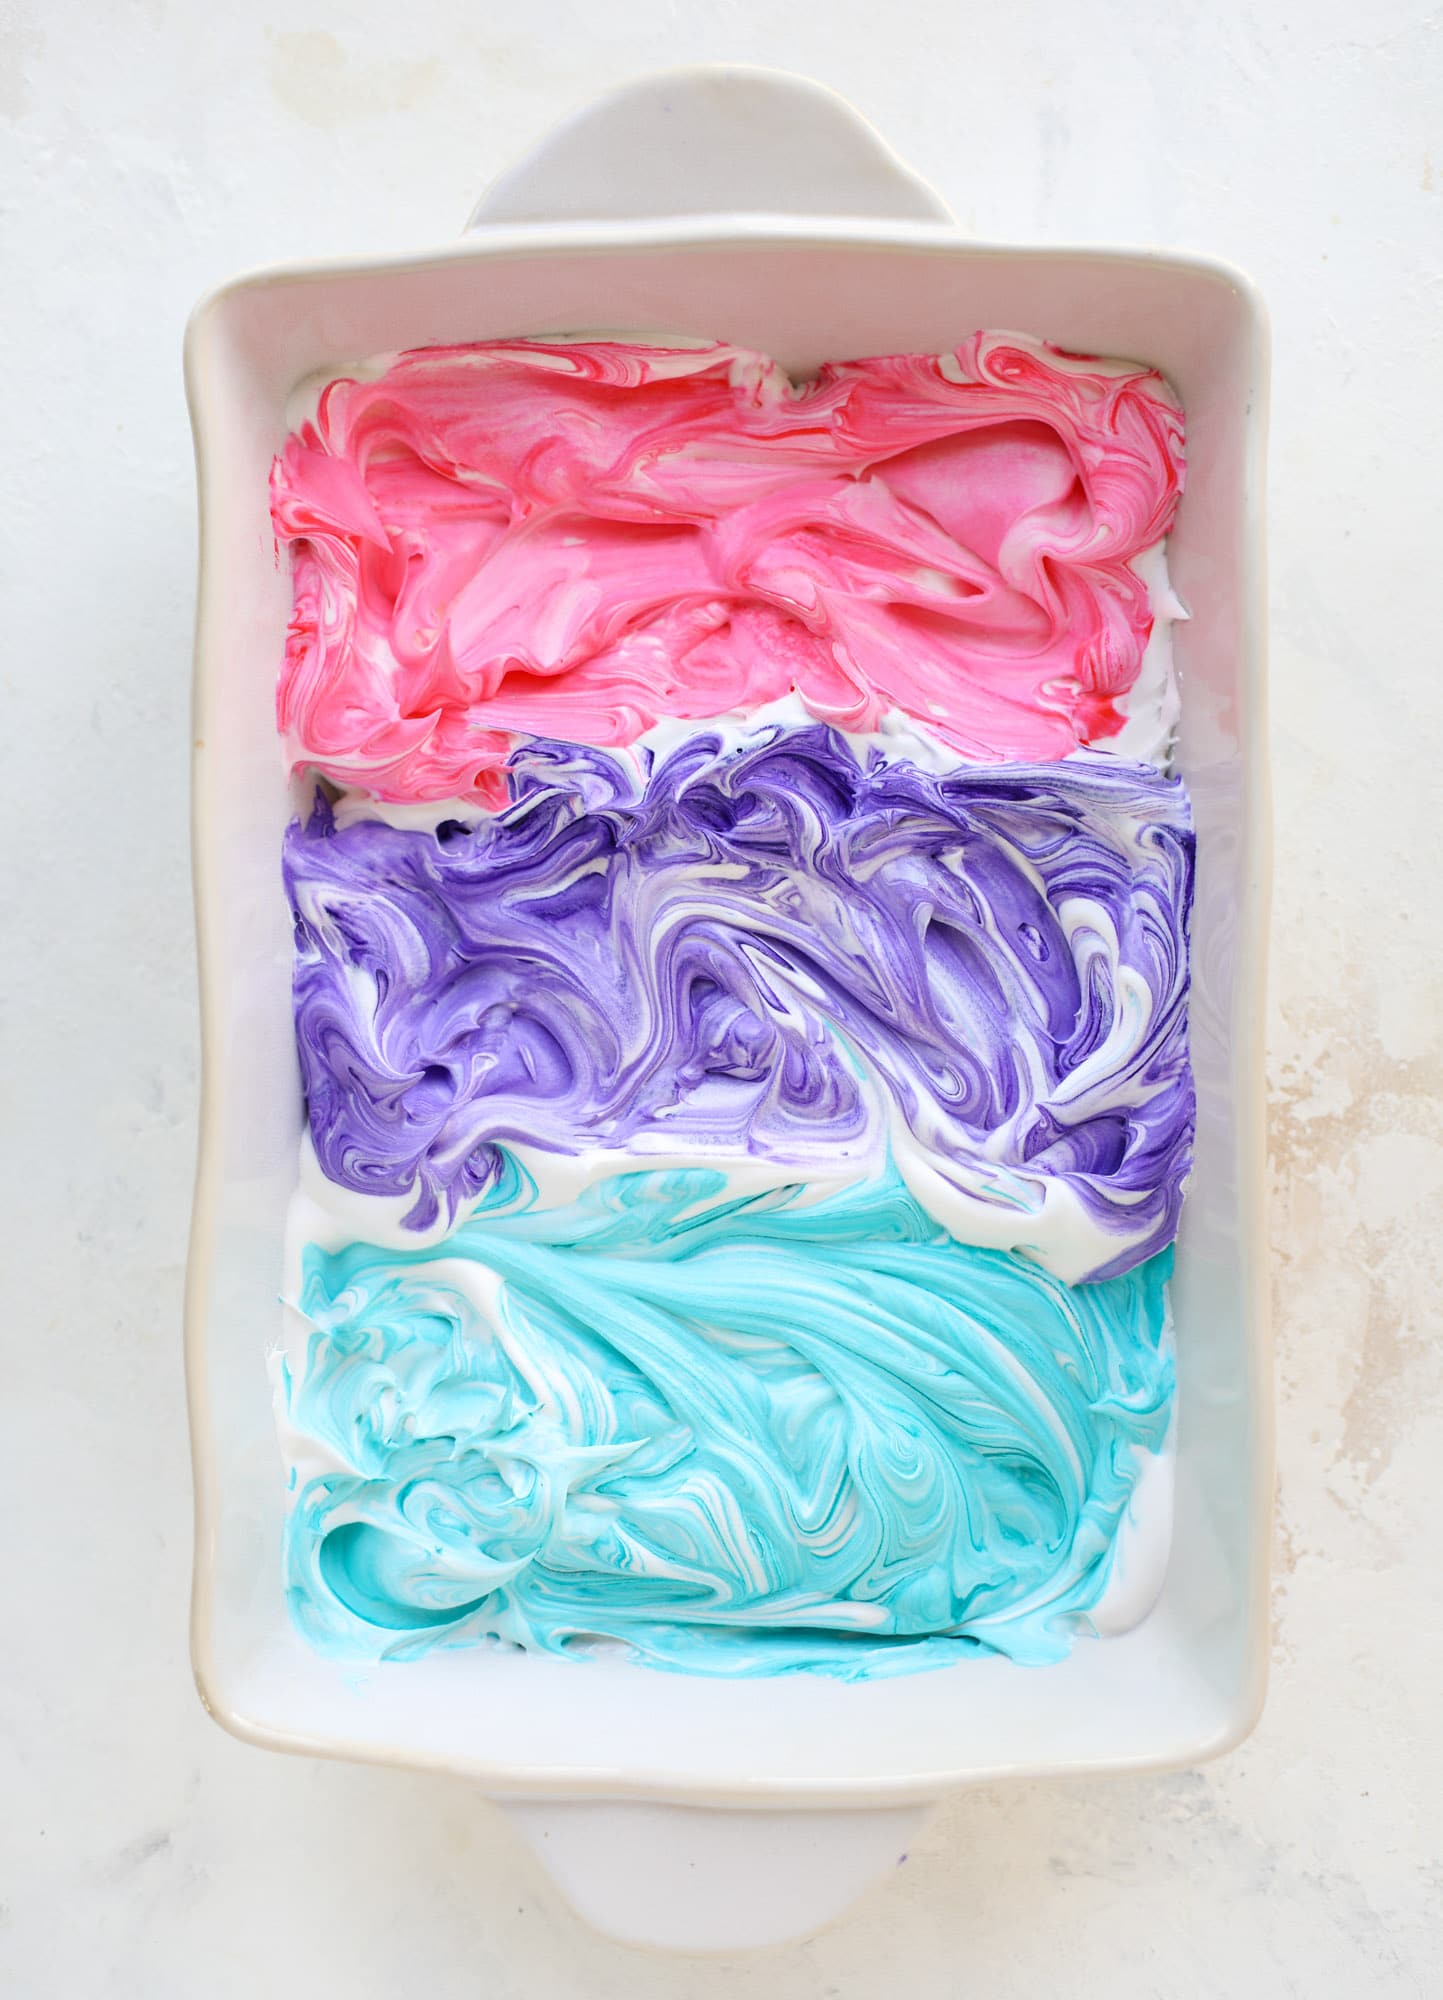 This is how to dye eggs with cool whip! It's so fun, super kid-friendly and ridiculously easy too. I love using this method to make unicorn eggs!